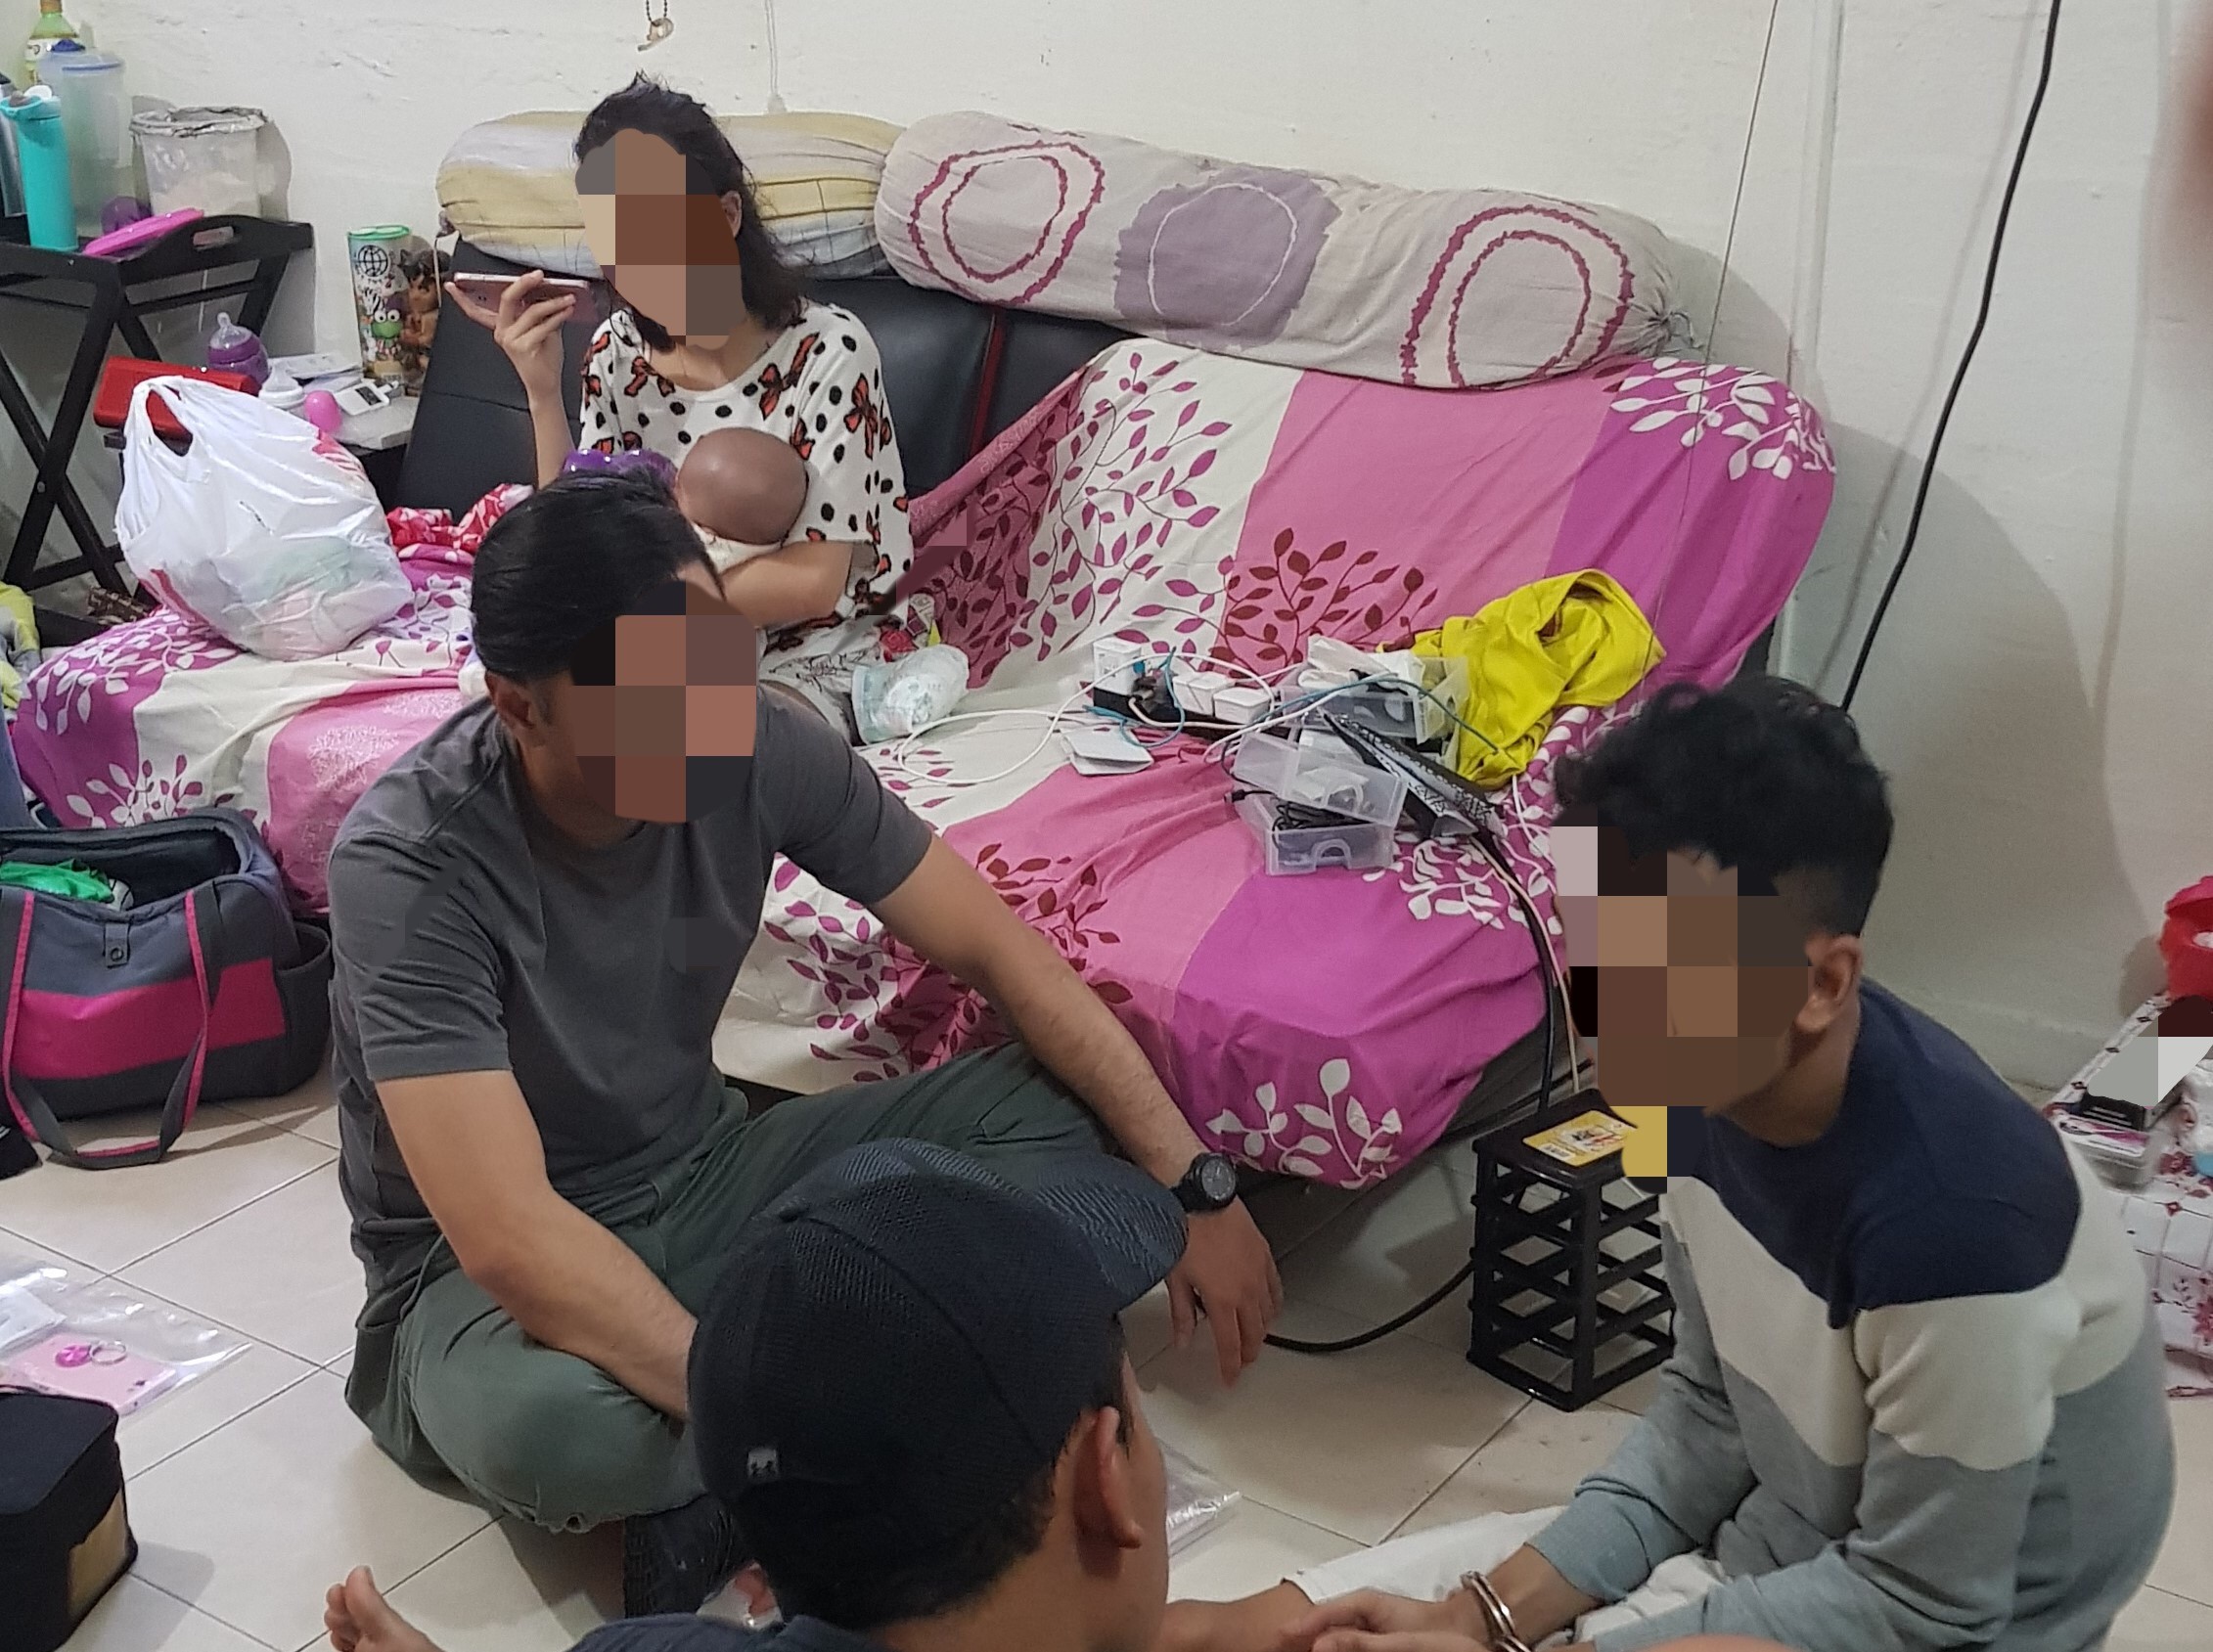 Three month old baby found with suspected drug offenders on 29 Aug 18